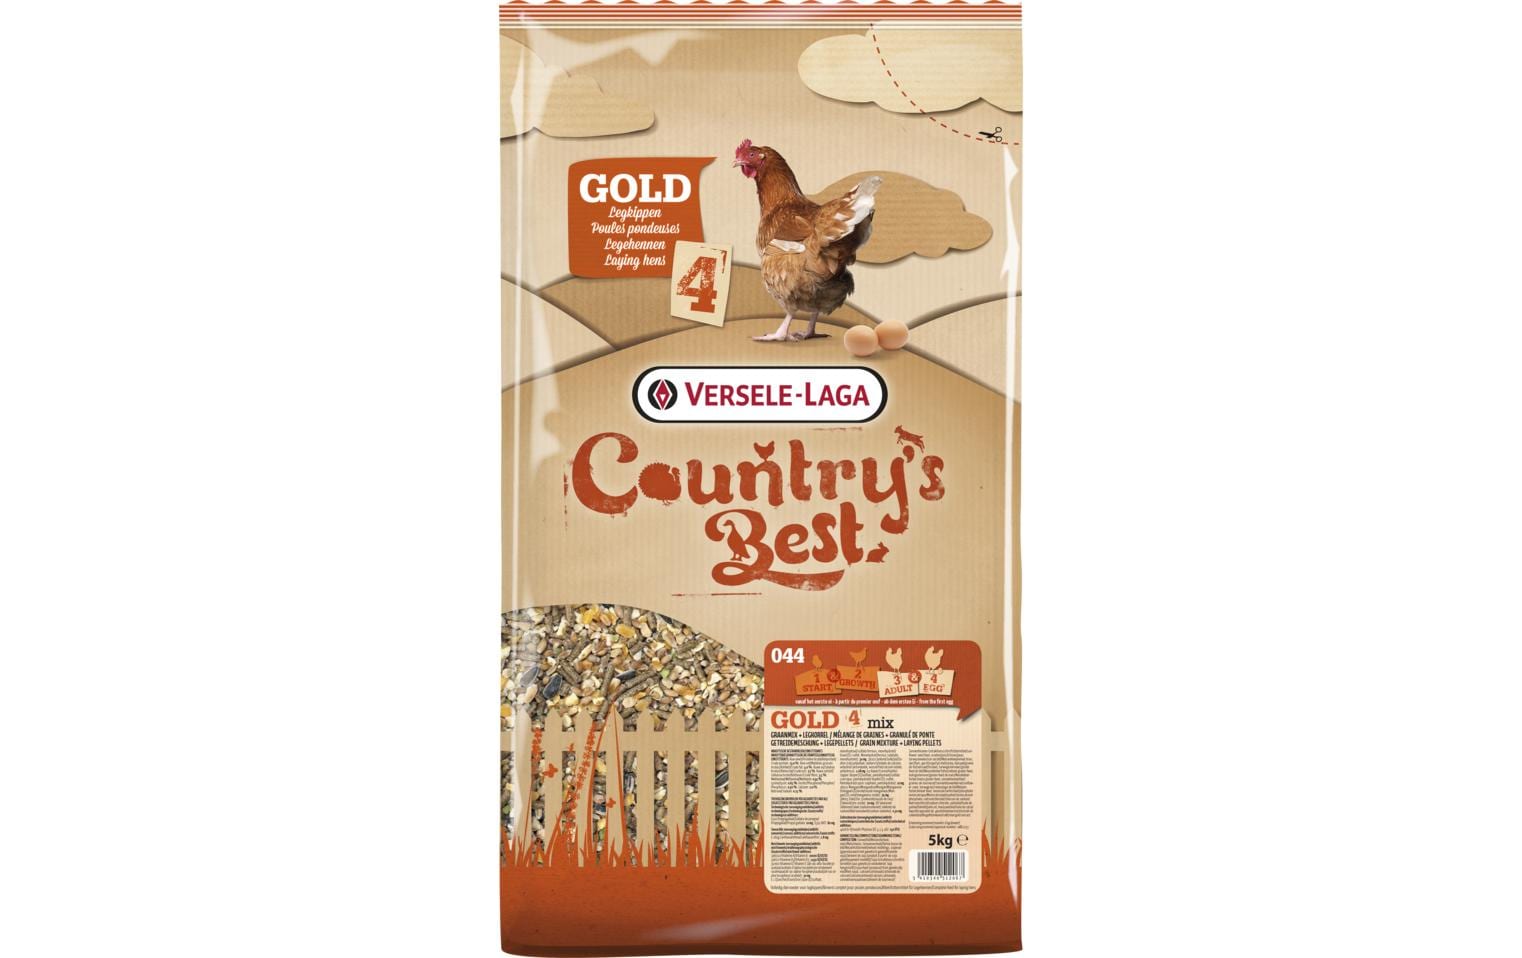 Versele Laga Hühnerfutter Country's Best Gold 4 Mix, 5 kg